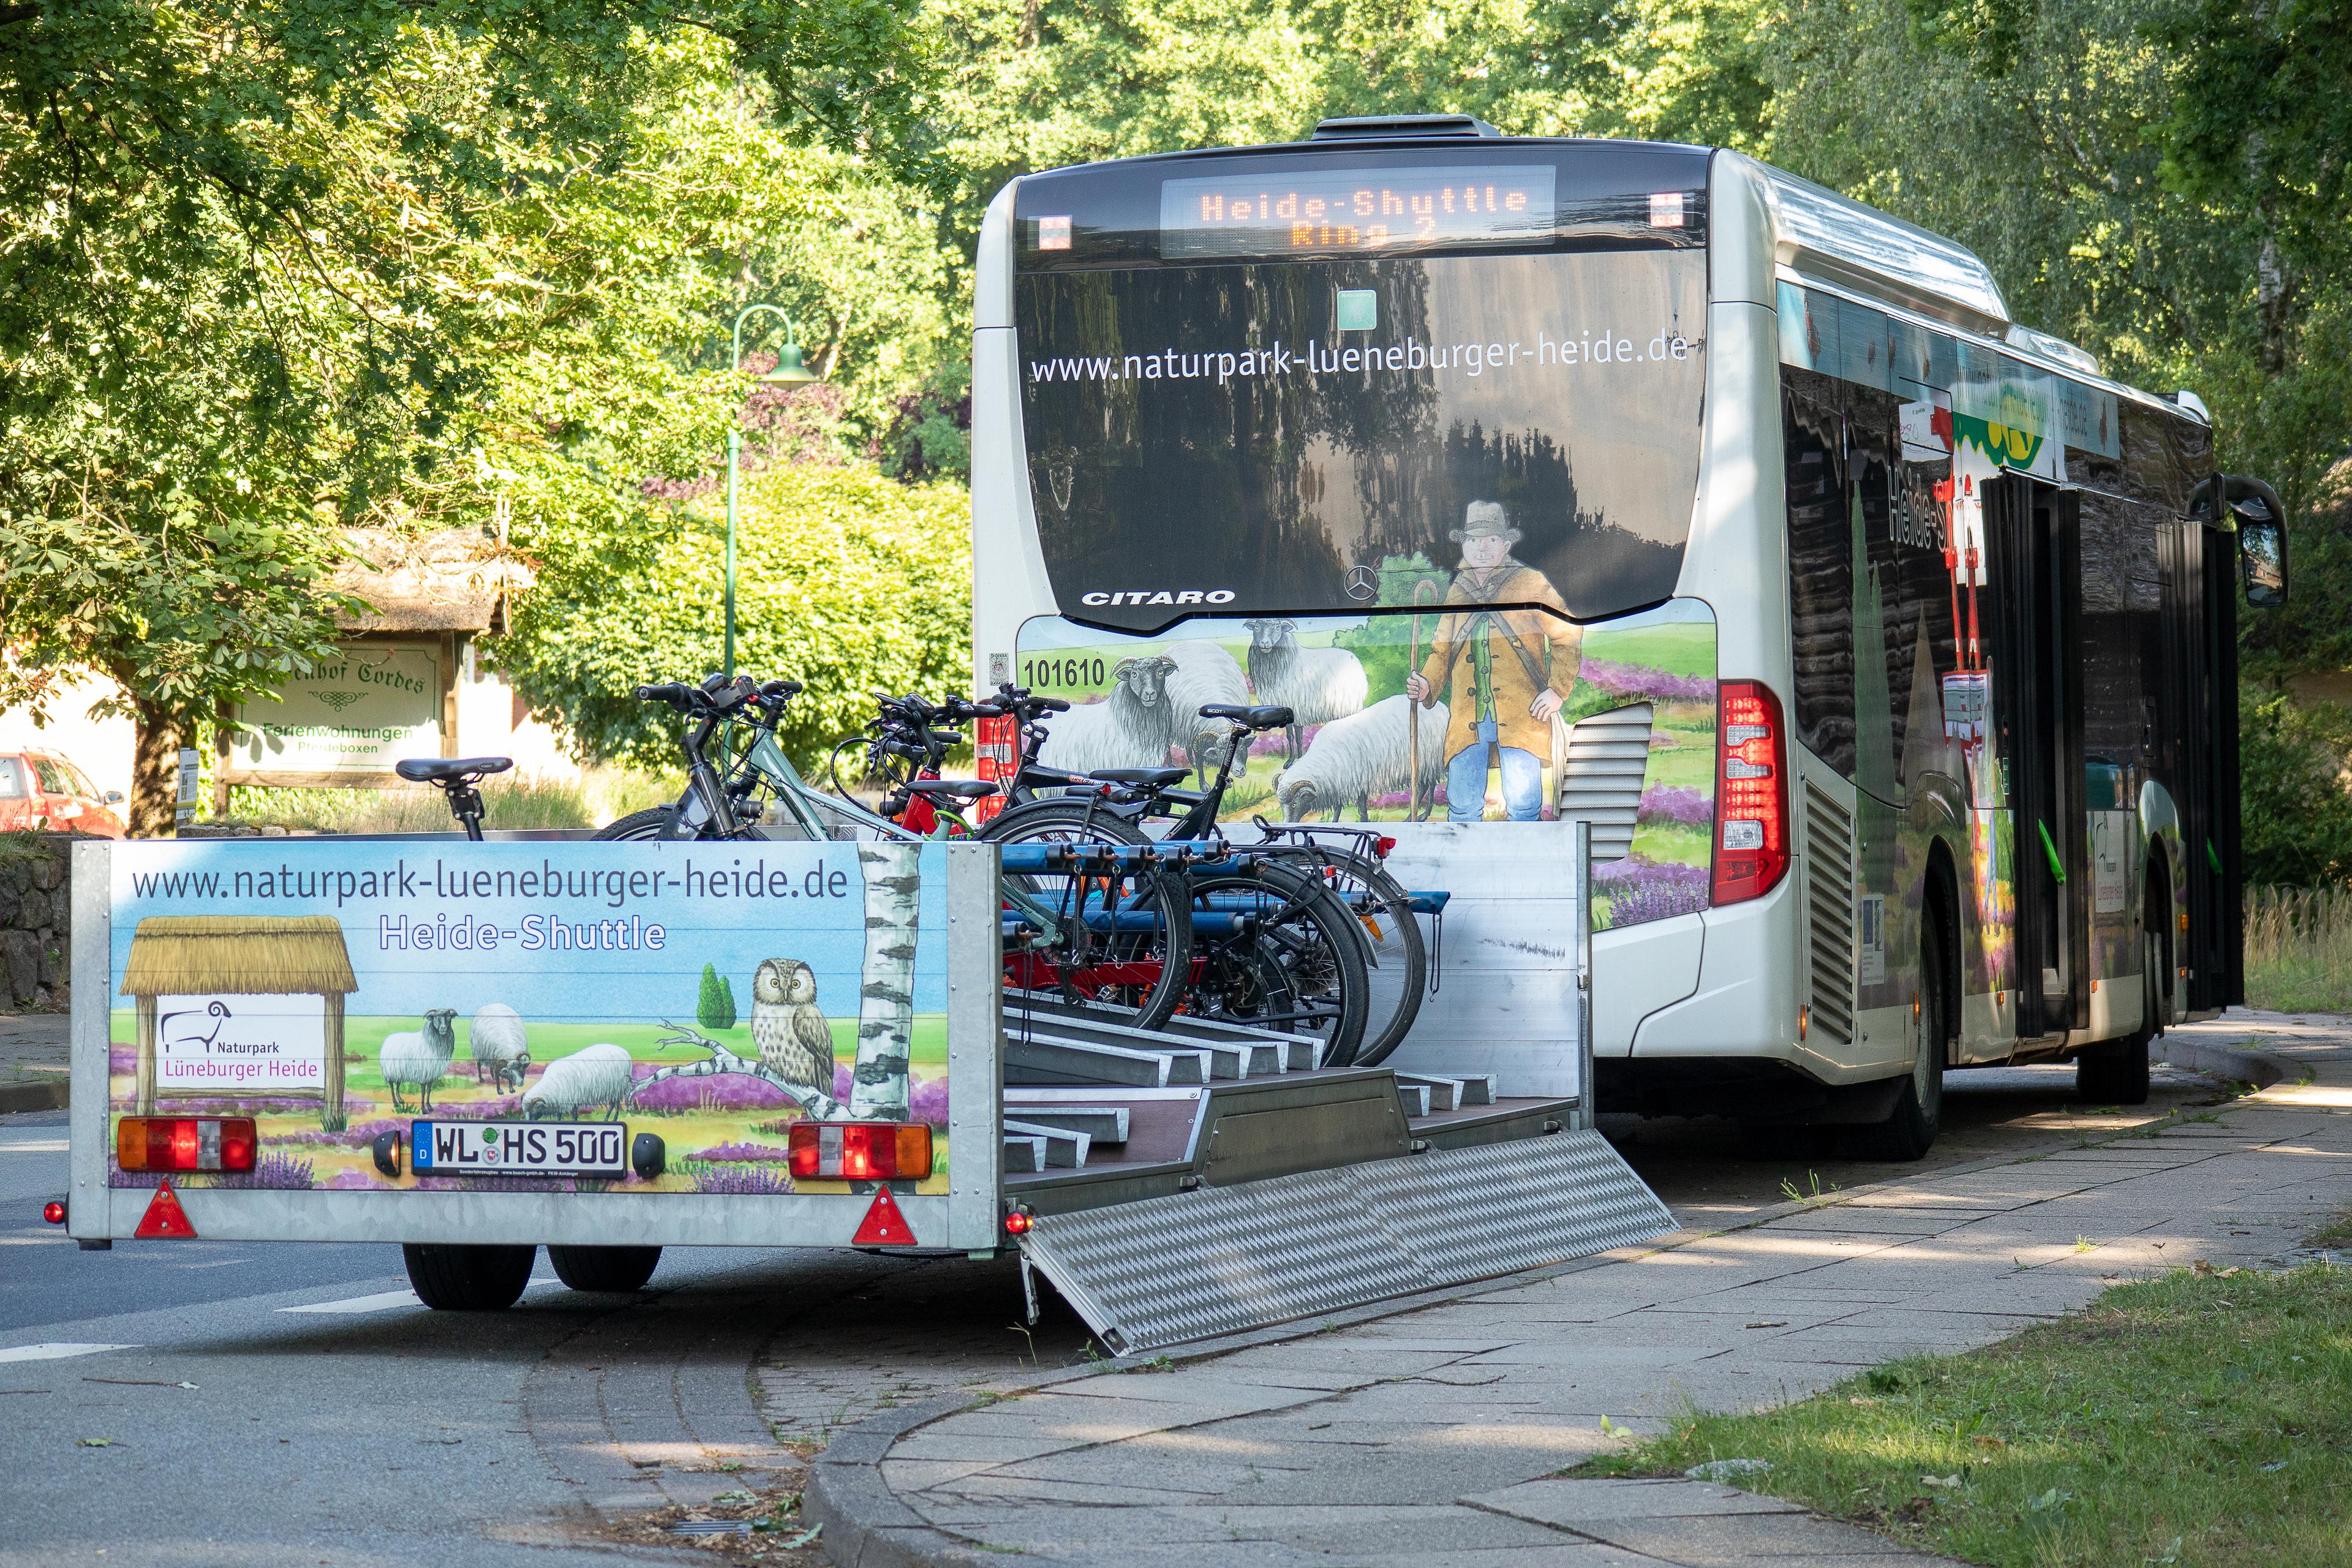 Heath Shuttle - free bus with bicycle trailer